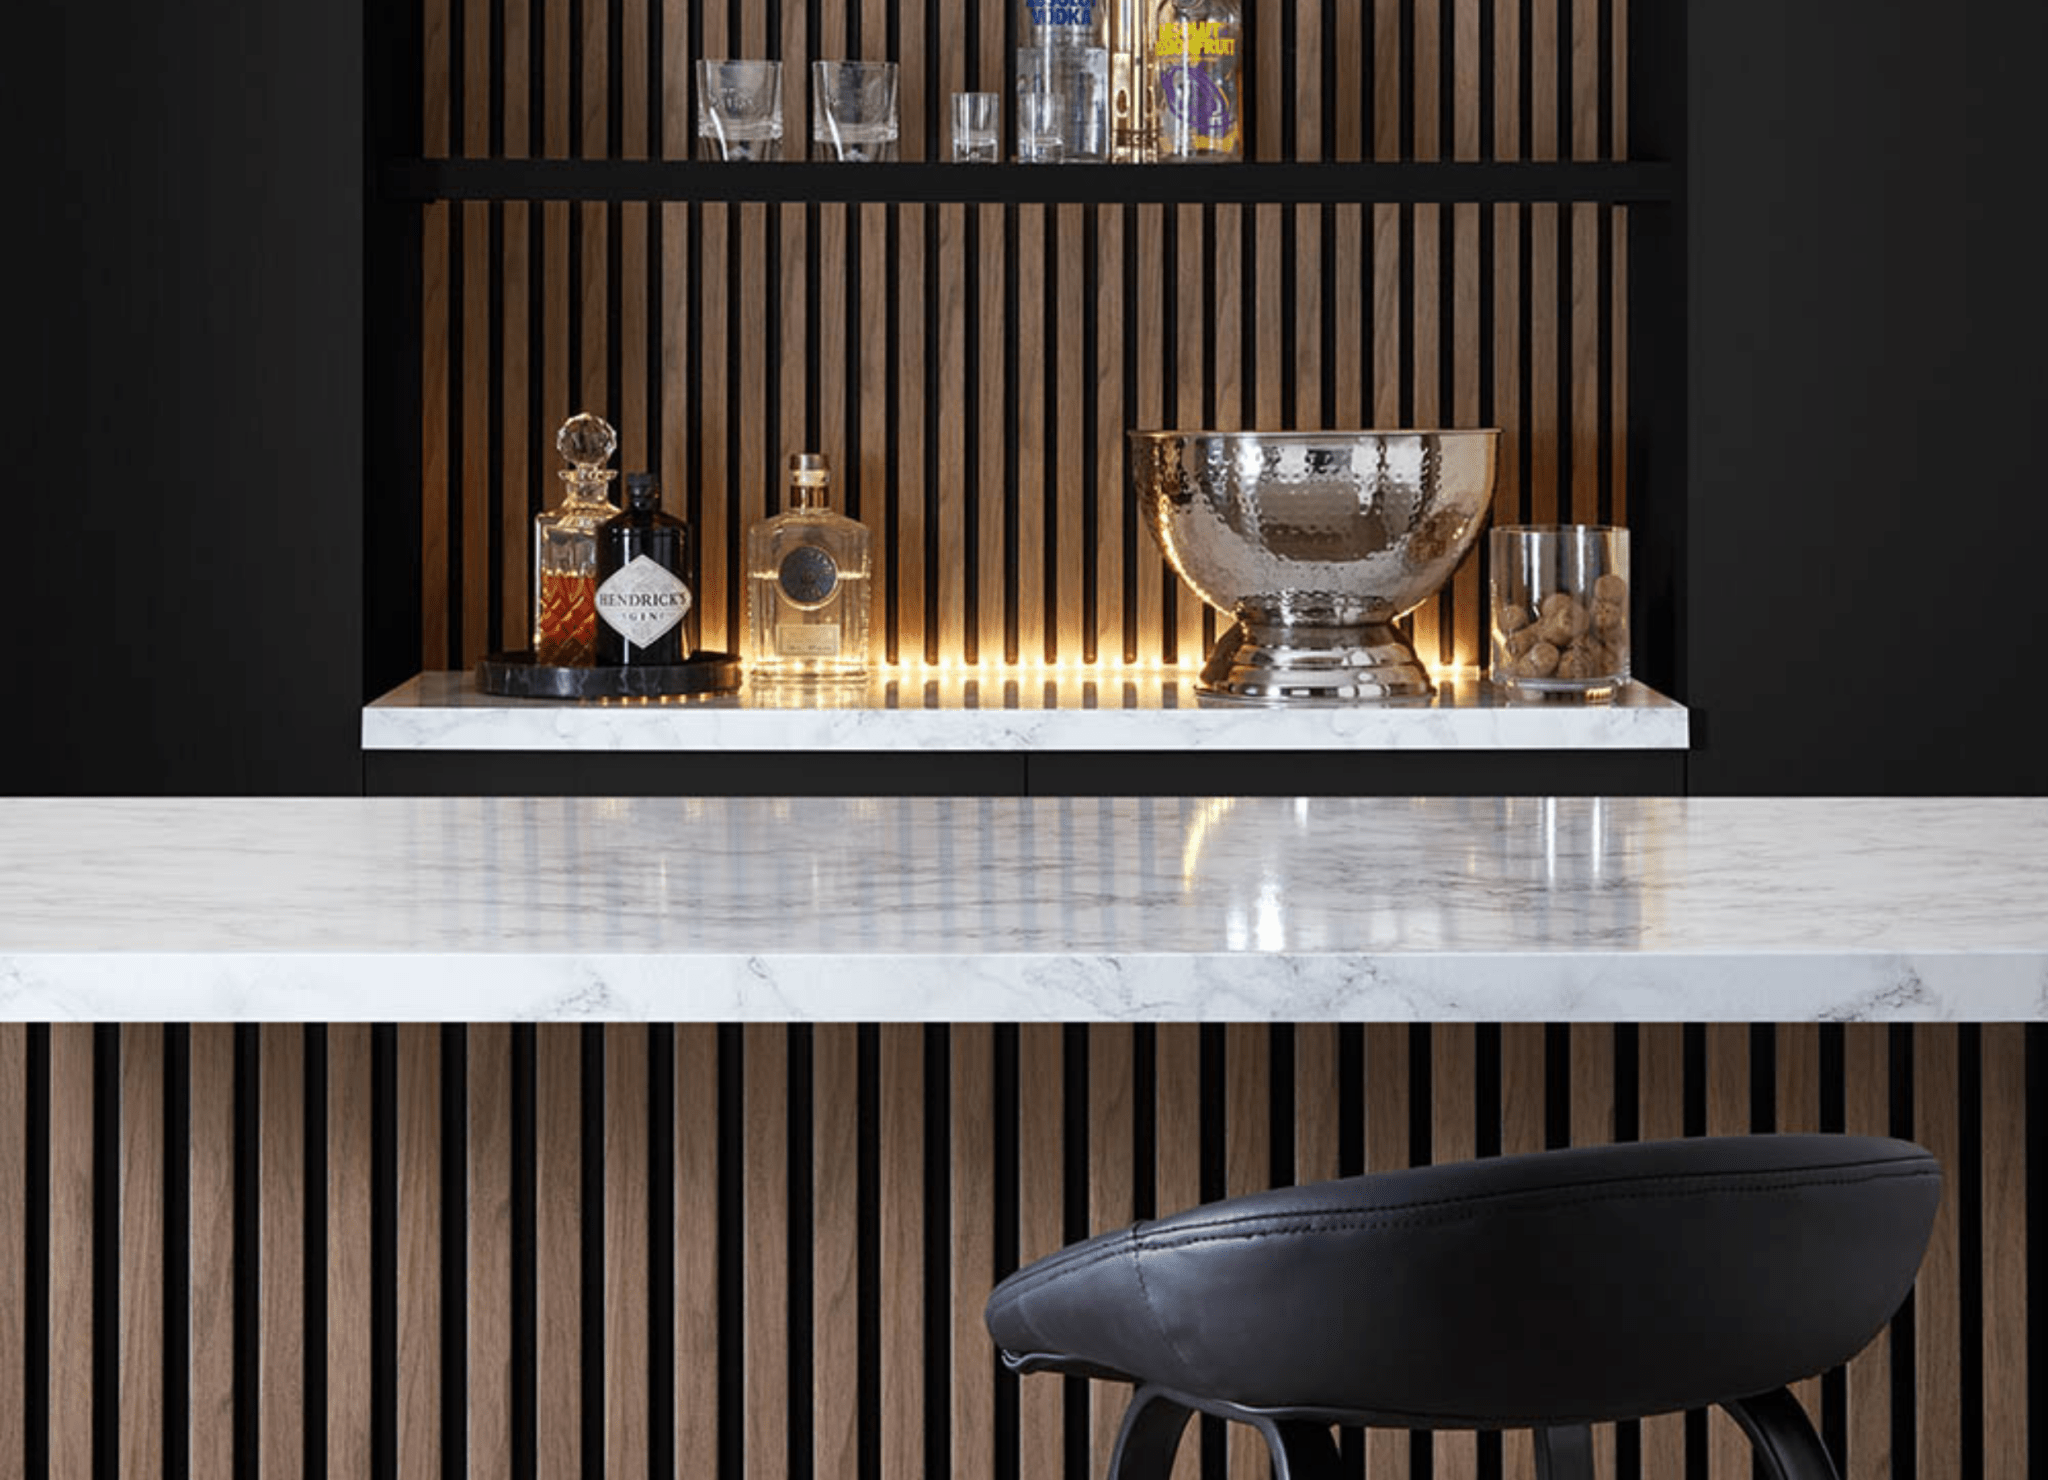 This image shows a kitchen island with the SlatWall behind the shelves and a bar stool. The shelves display bottles of alcohol and an ice bucket 